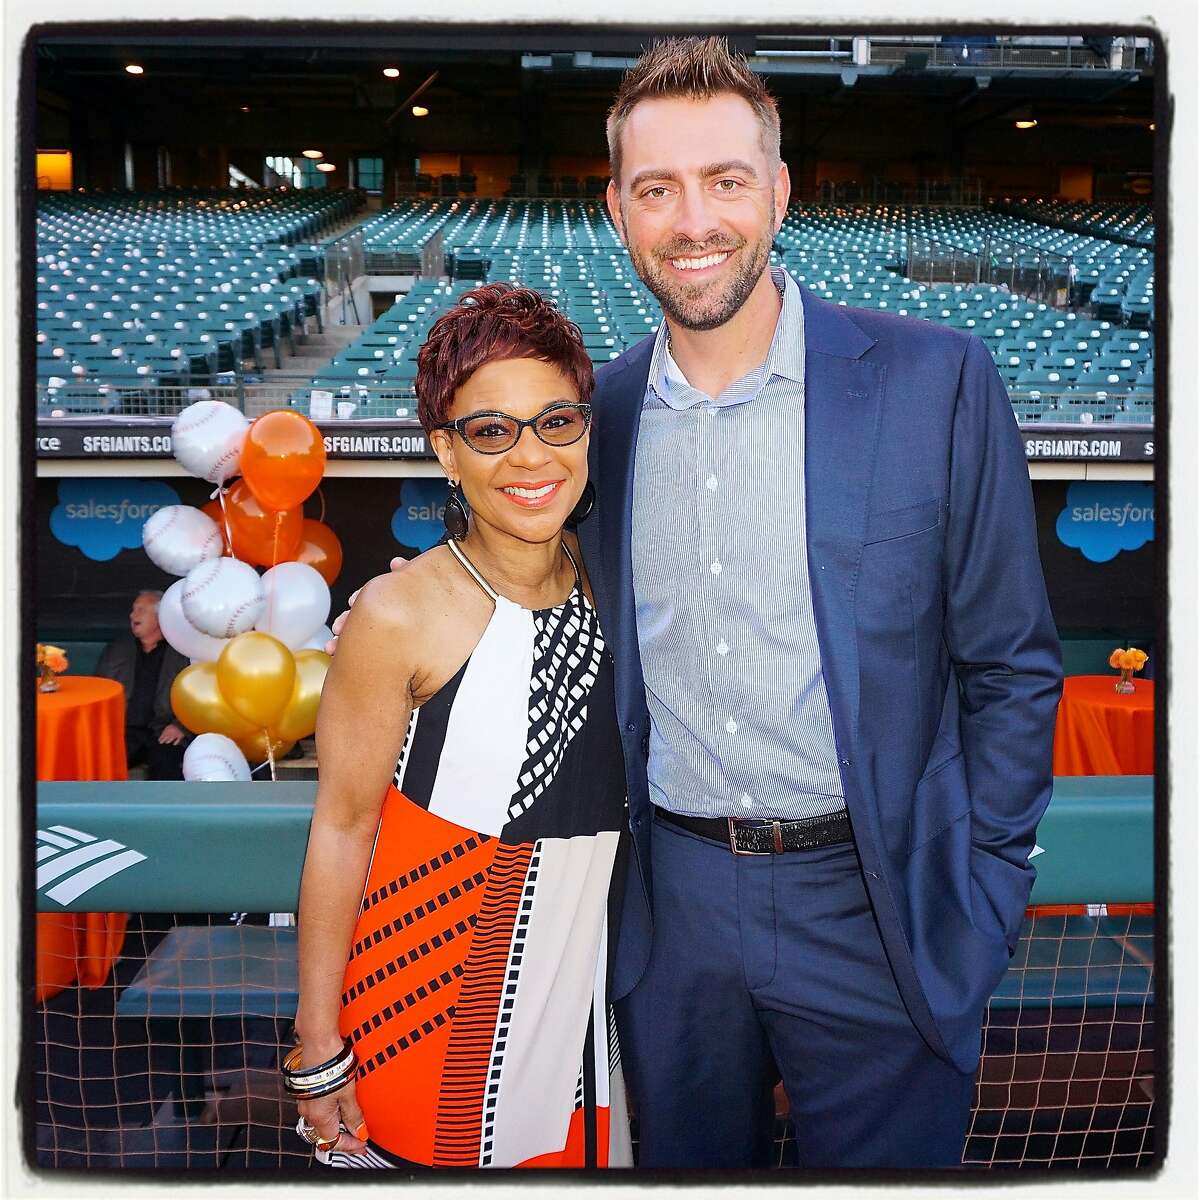 SF Giants announcer Renel Brooks-Moon and former Giants pitcher Jeremy Affeldt at AT&T ballpark to assist their good friend Buster Posey raise money for pediatric cancer research. Sept 2016.